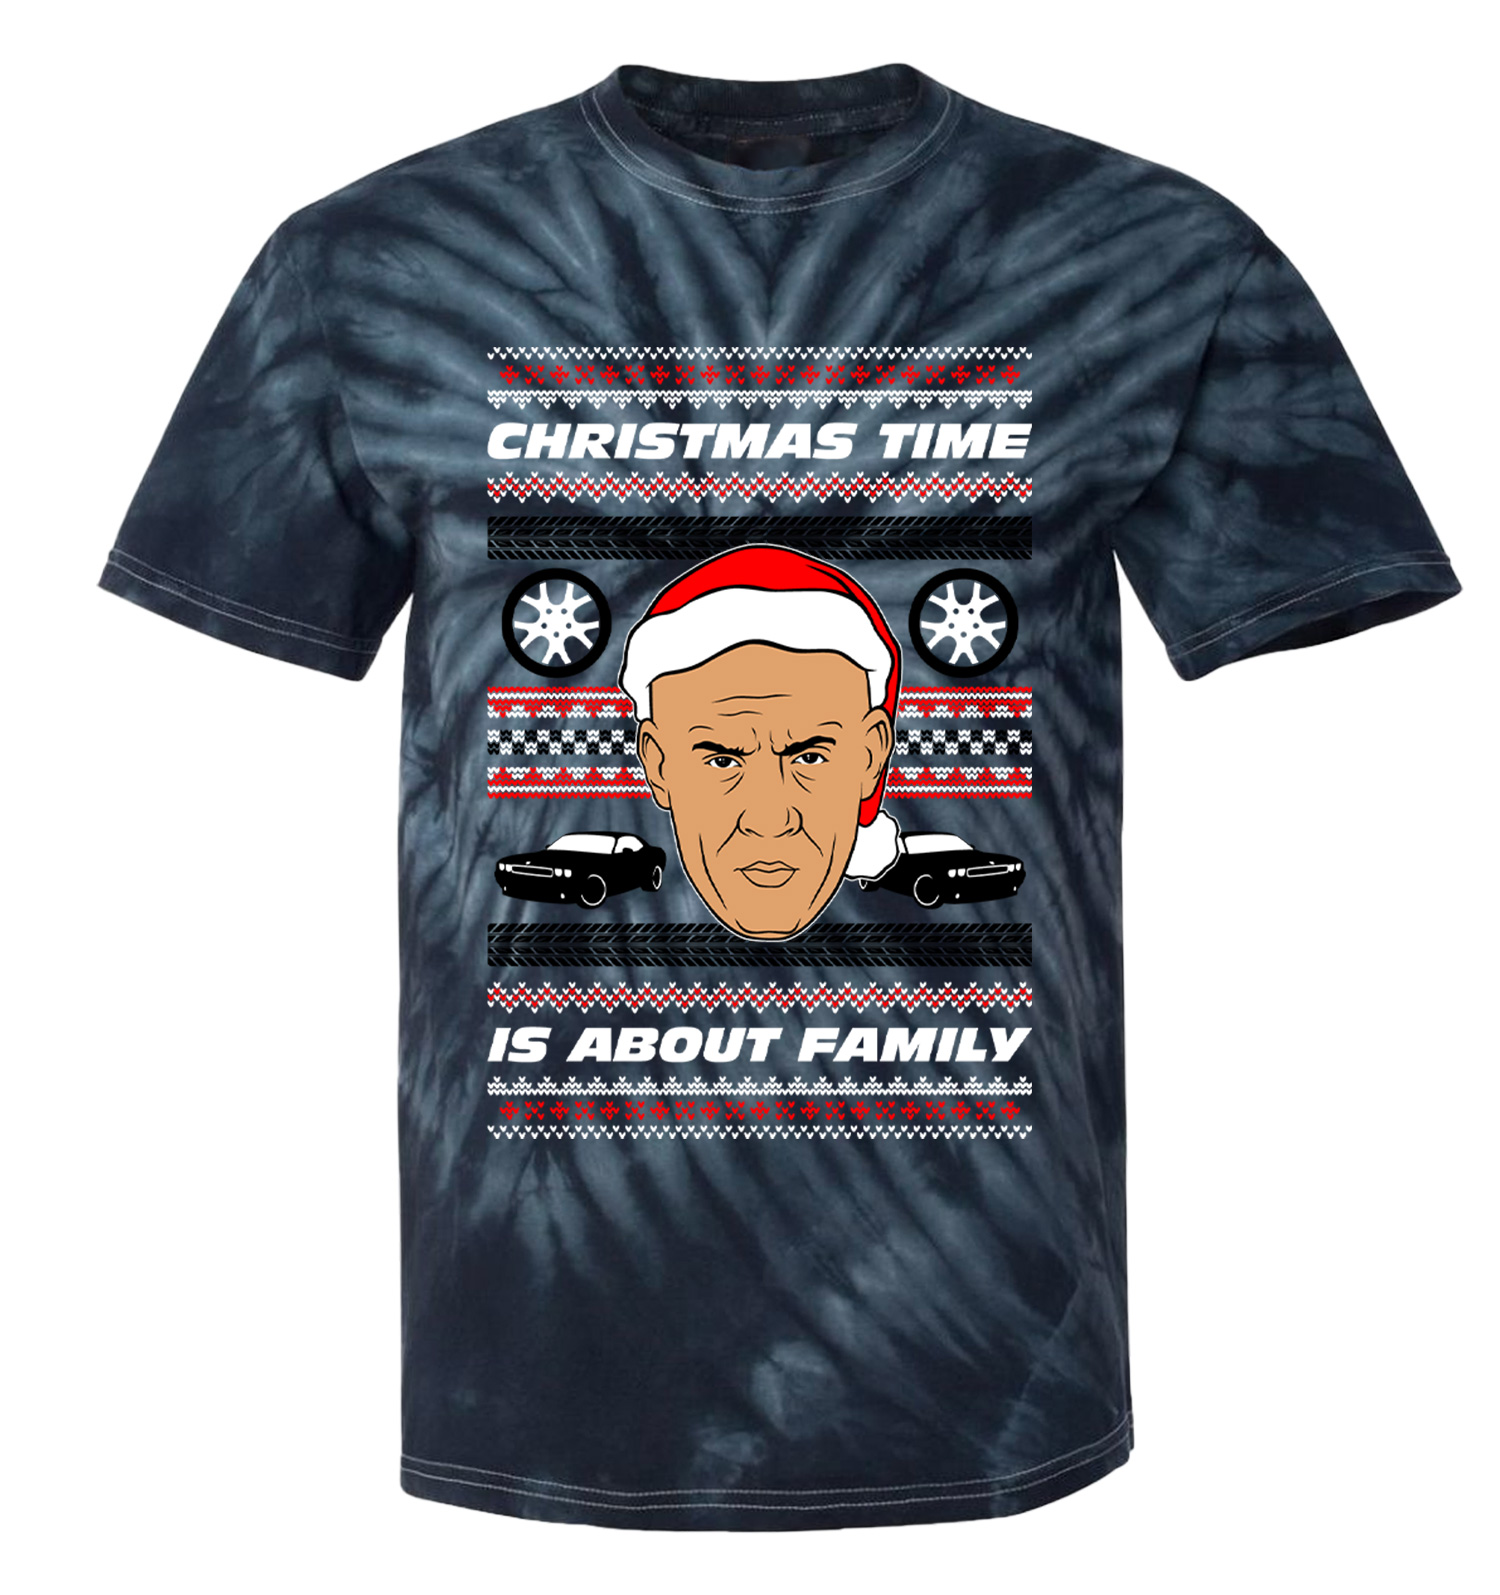 Christmas Time Is About Family - Furious Dom Toretto Men\'s T-shirt | eBay